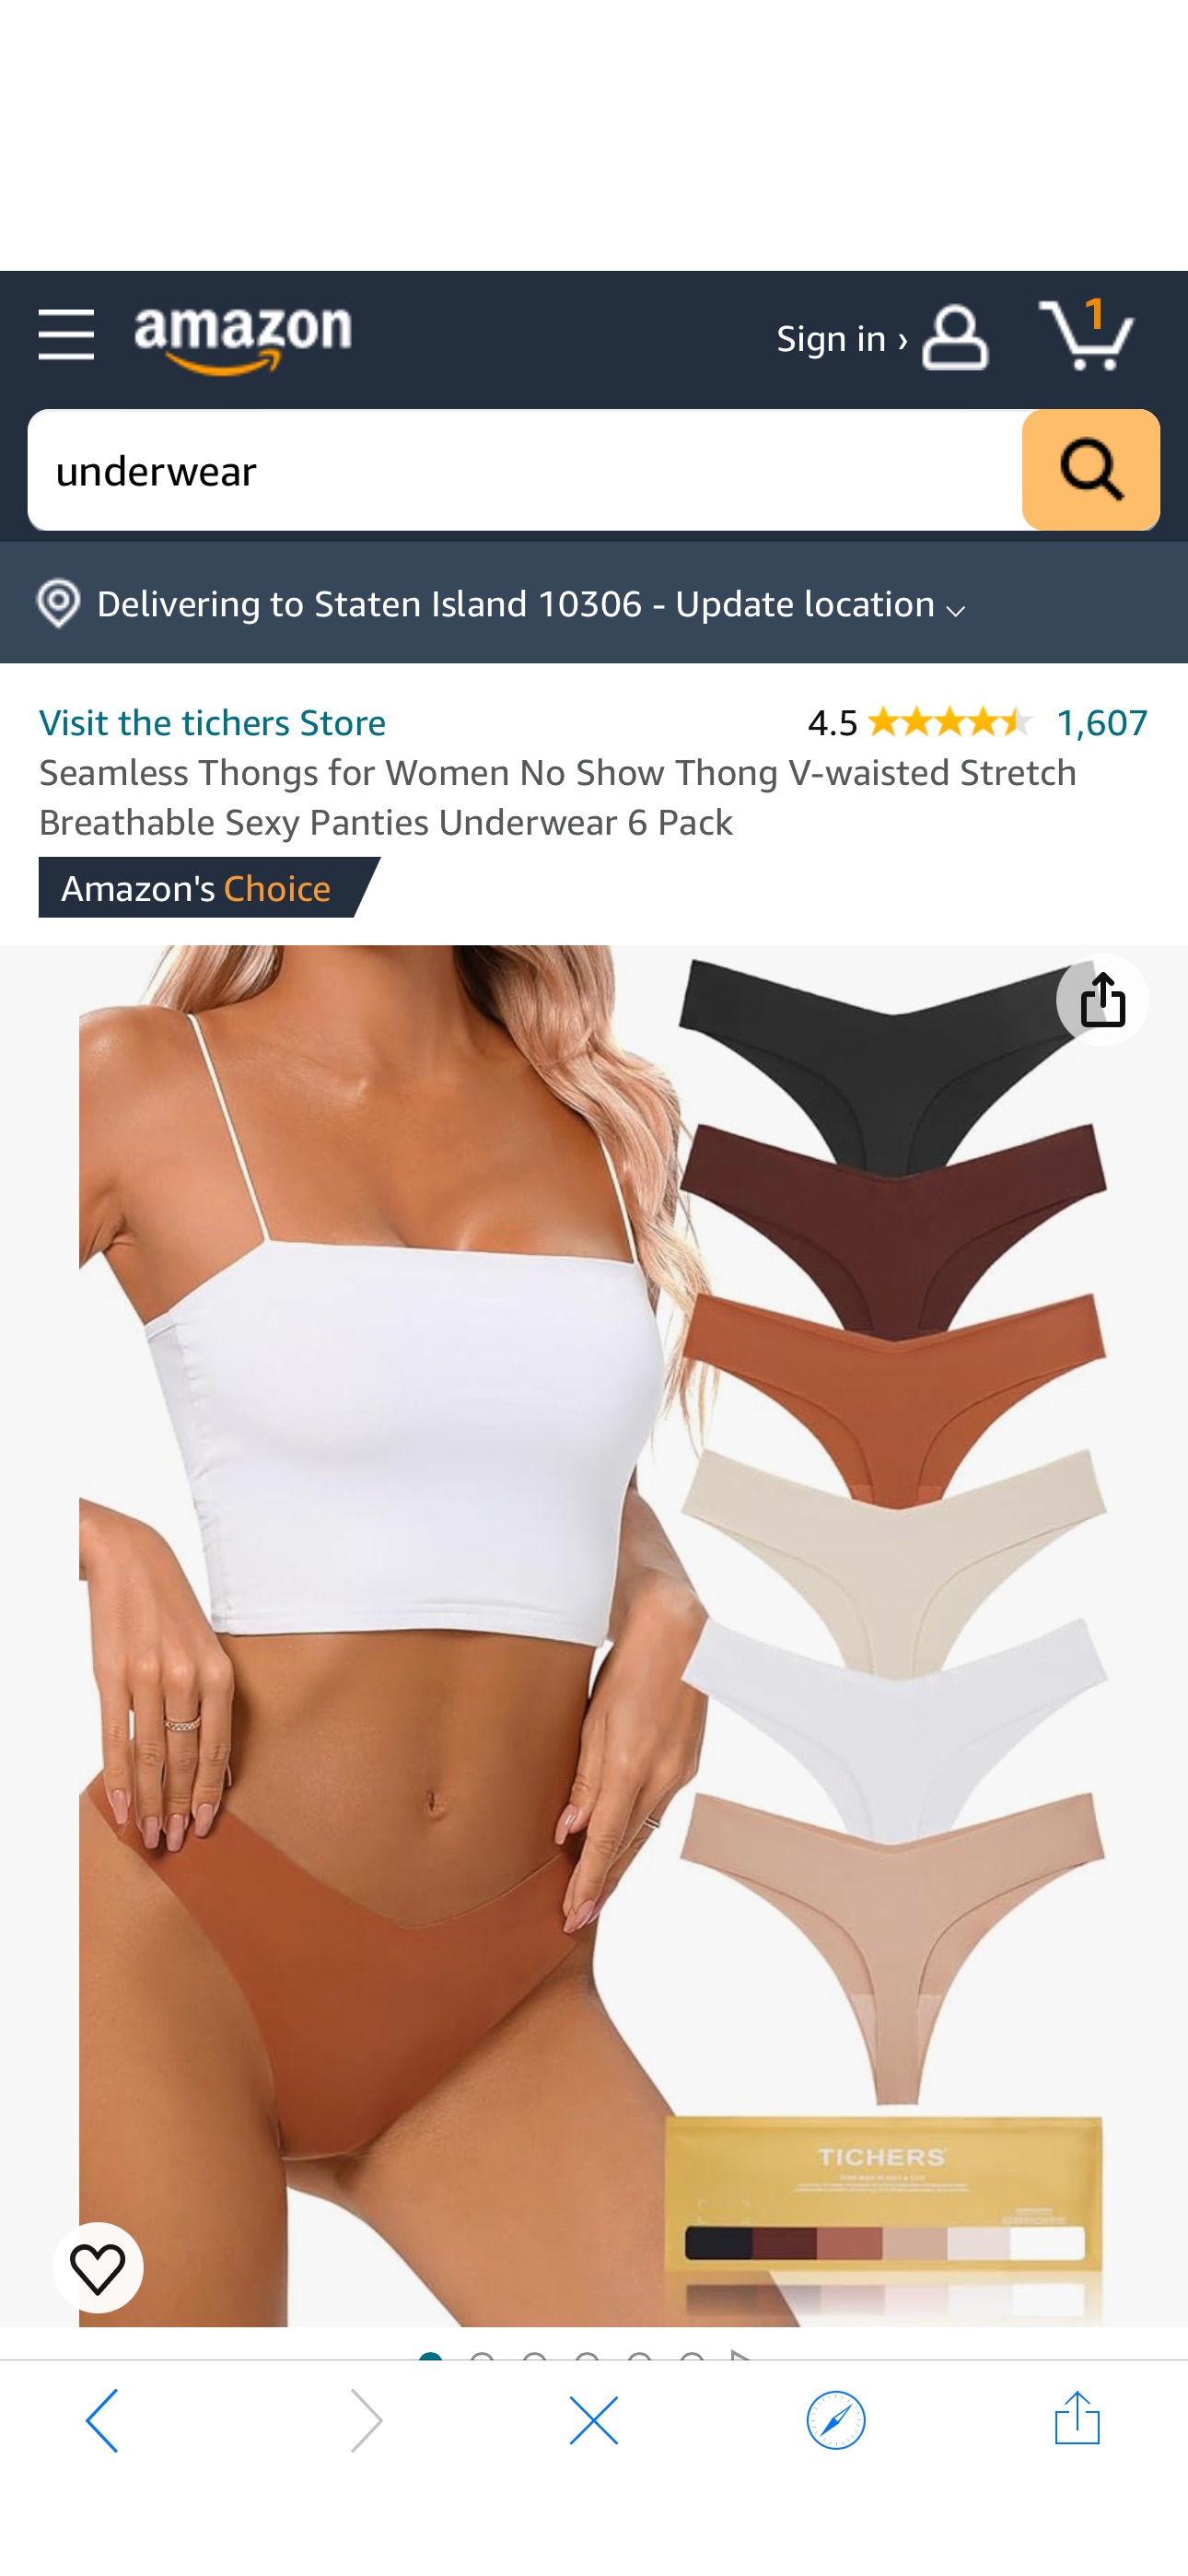 Amazon.com: tichers Seamless Thongs for Women No Show Thong V-waisted Stretch Breathable Sexy Panties Underwear 6 Pack : Clothing, Shoes & Jewelry